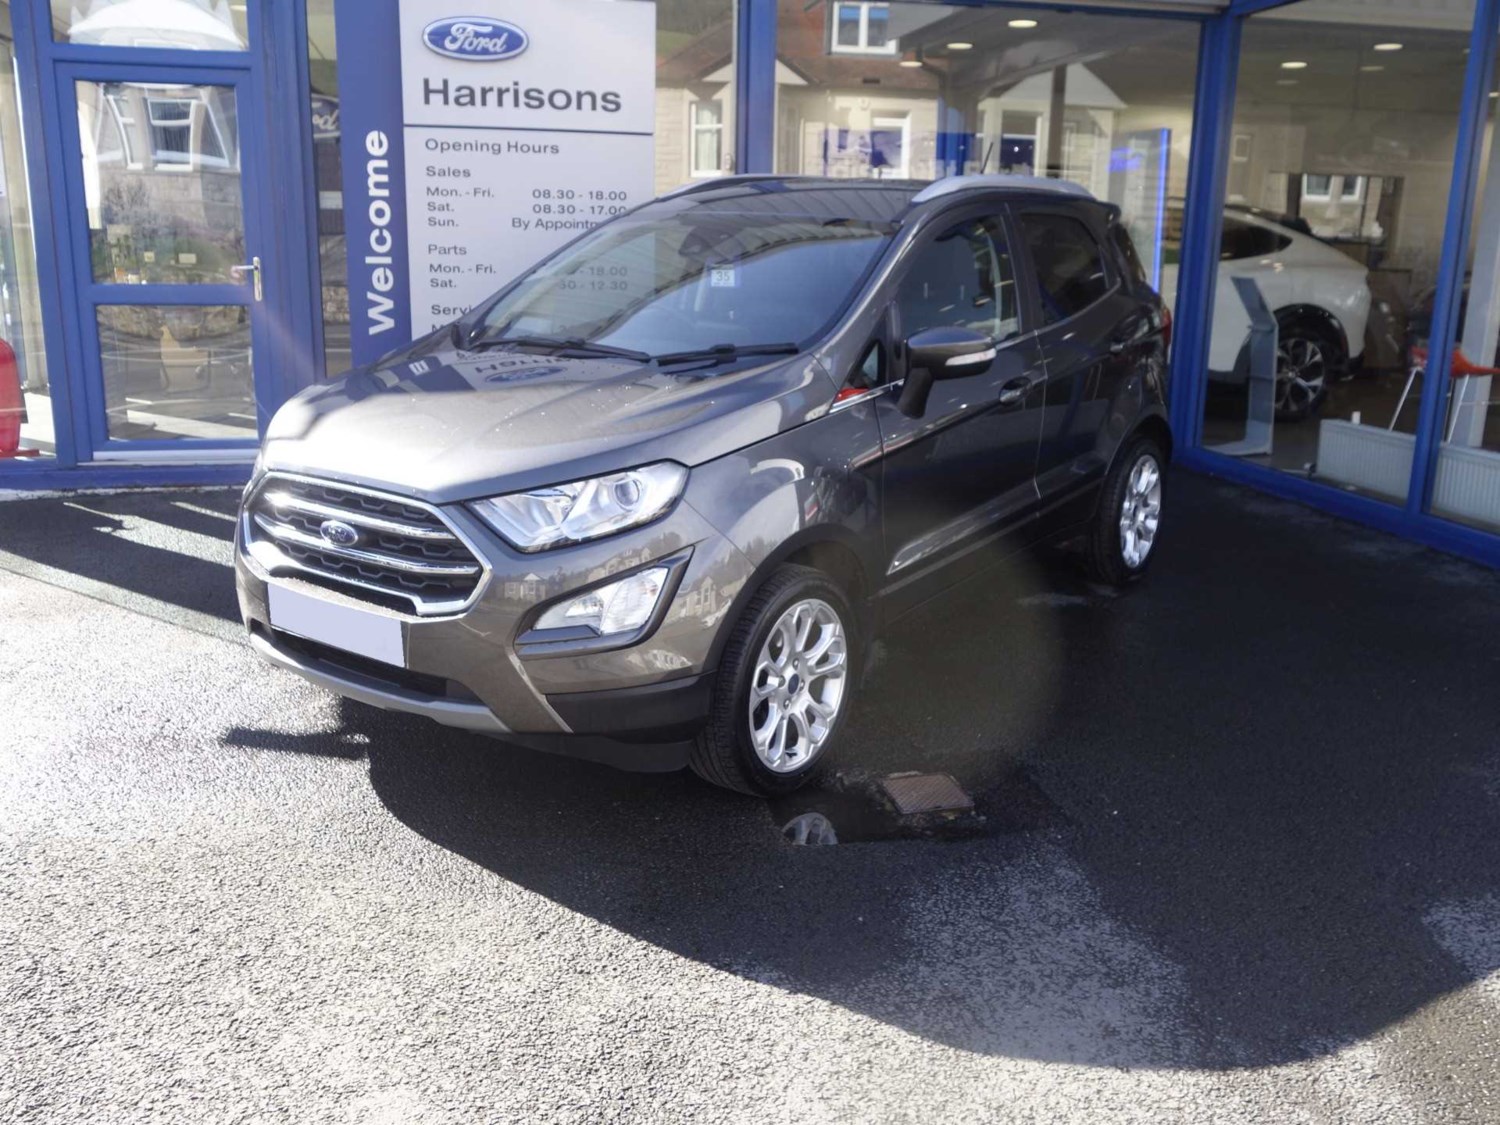 2020 used Ford Ecosport TITANIUM 1.0 ECOBOOST 125PS 5dr